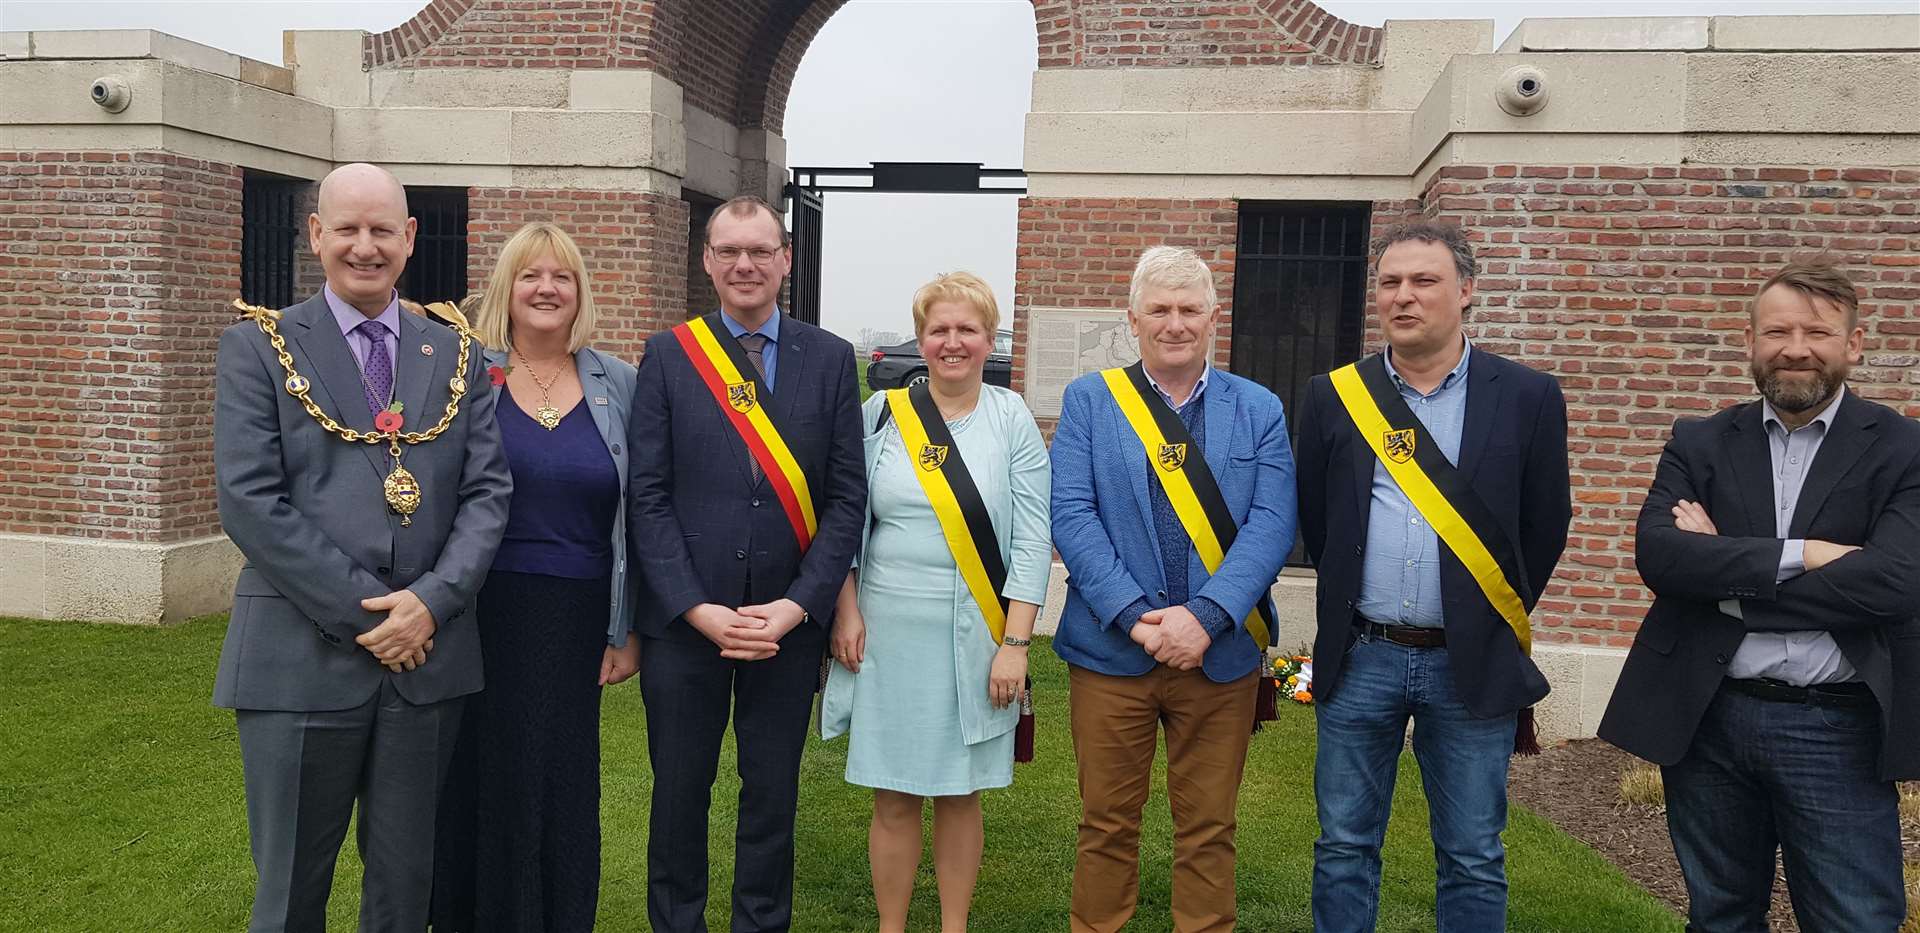 The Mayor of Maidstone meets Belgian civic officials at the Menin Gate